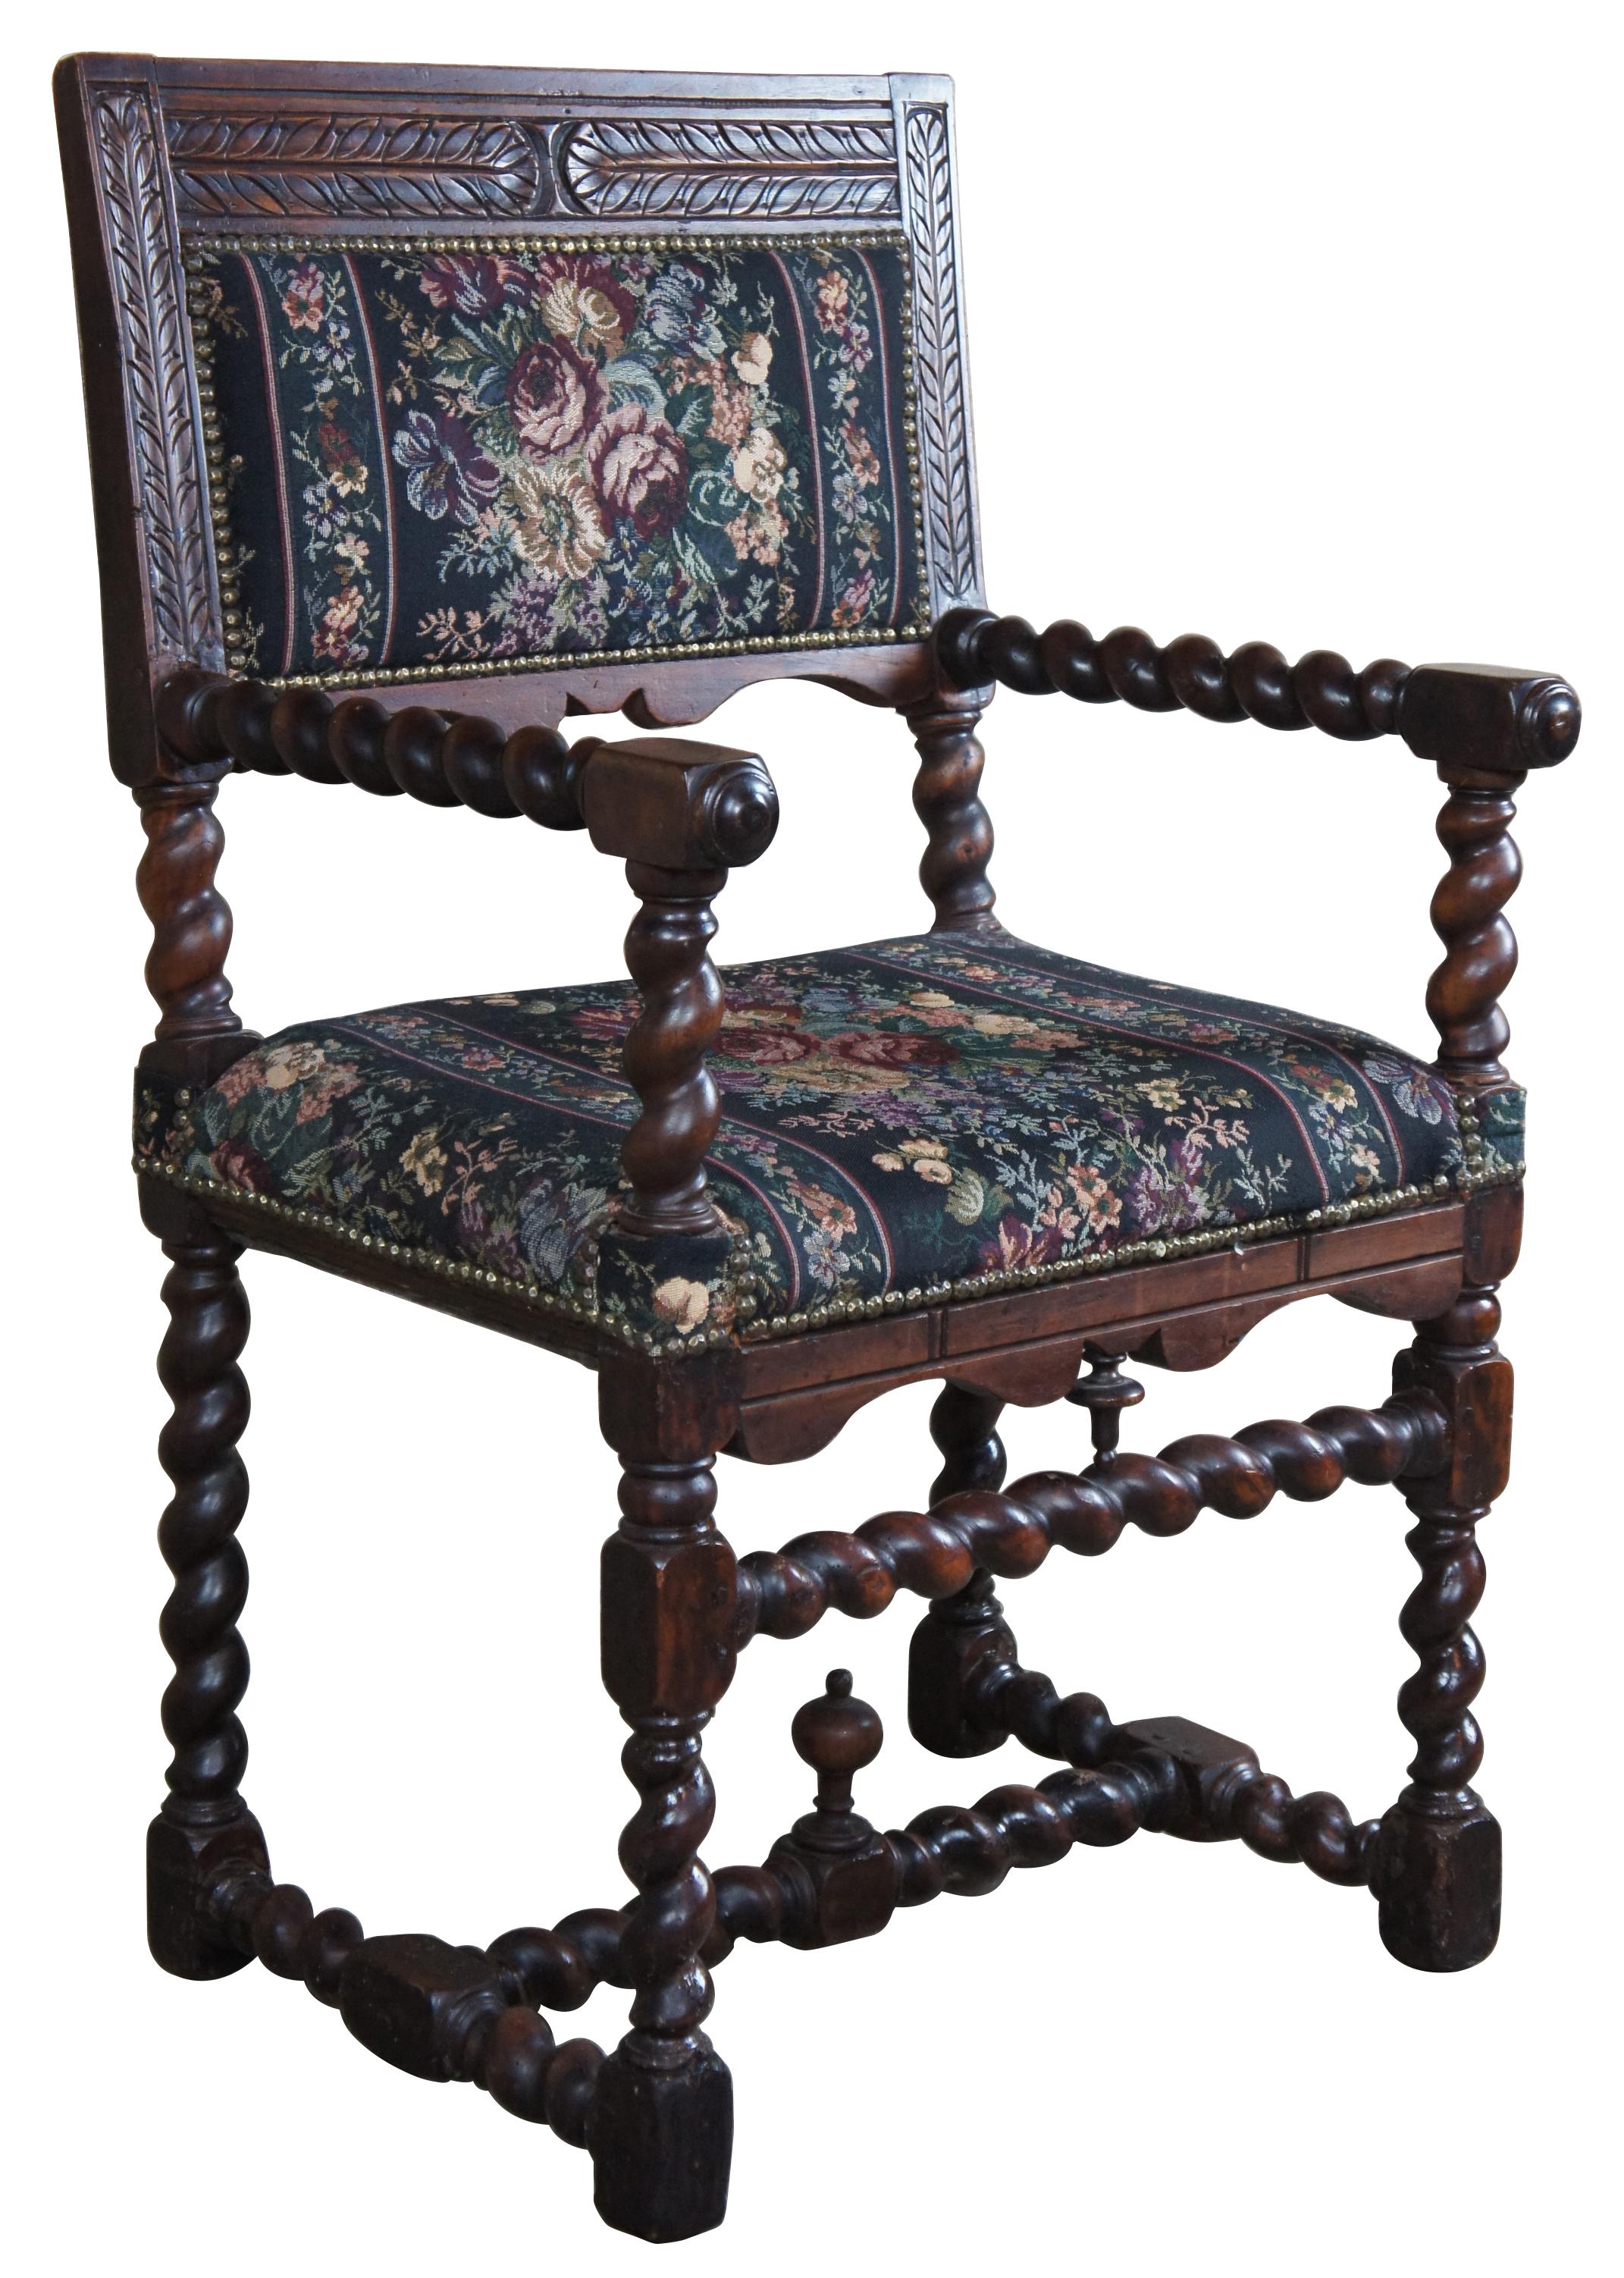 Mid-19th century English oak throne chair. Features Spanish inspired carvings along the back, serpentine aprons, barley twist supports, trestle base with upward facing finial, floral upholstered seat and back with nailhead trim.
 